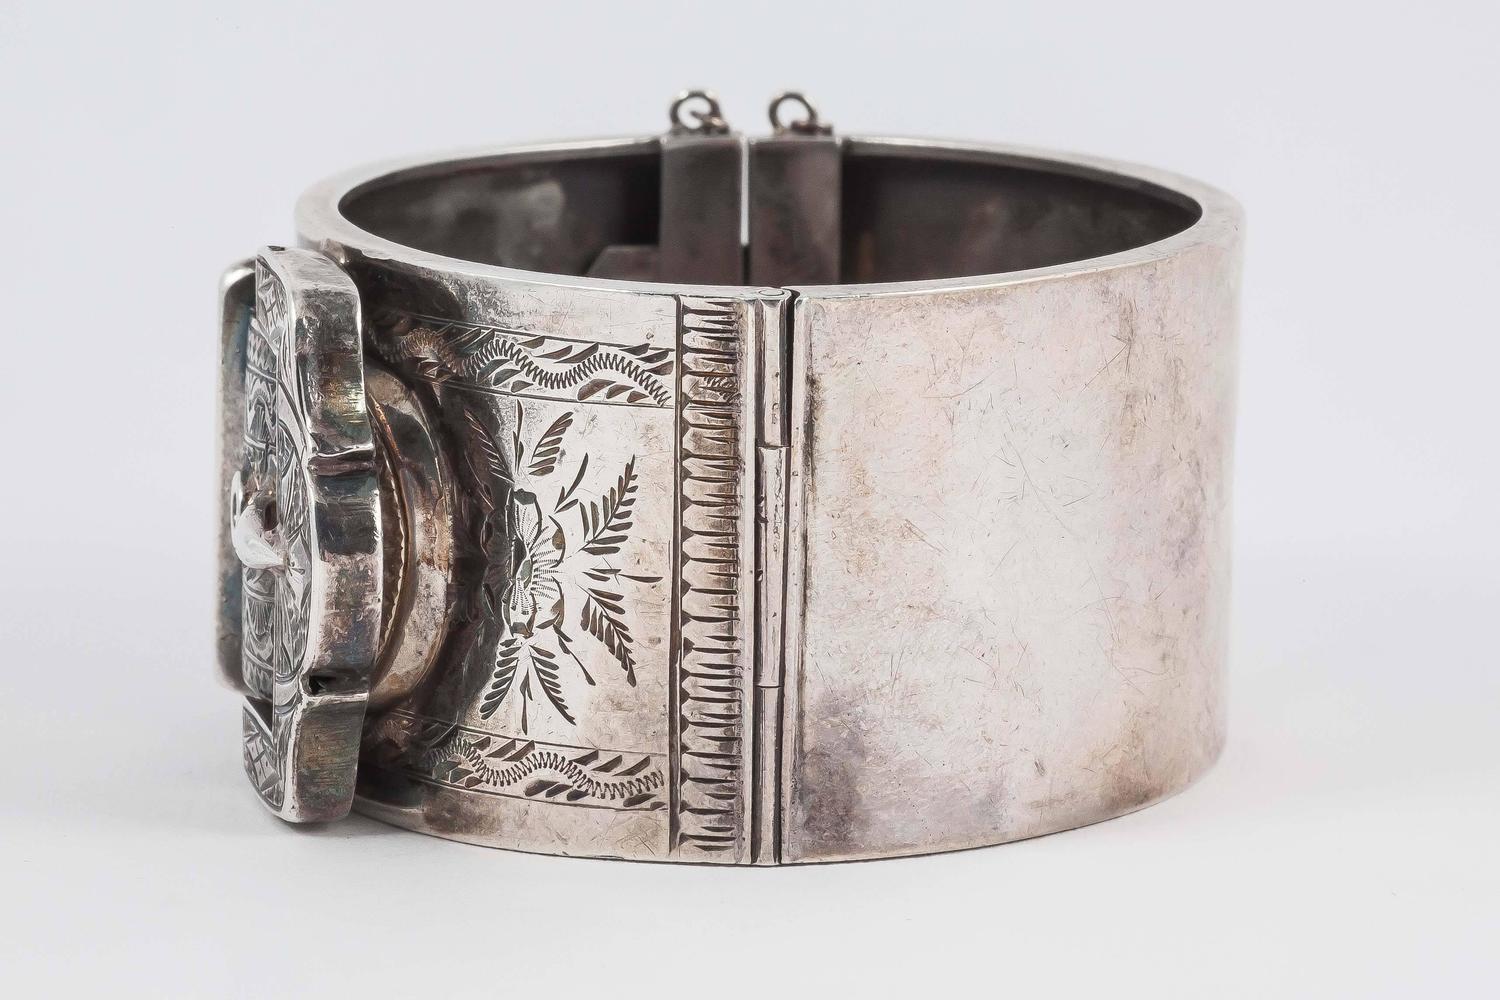 Lovely English Victorian silver buckle cuff bracelet For Sale at 1stdibs